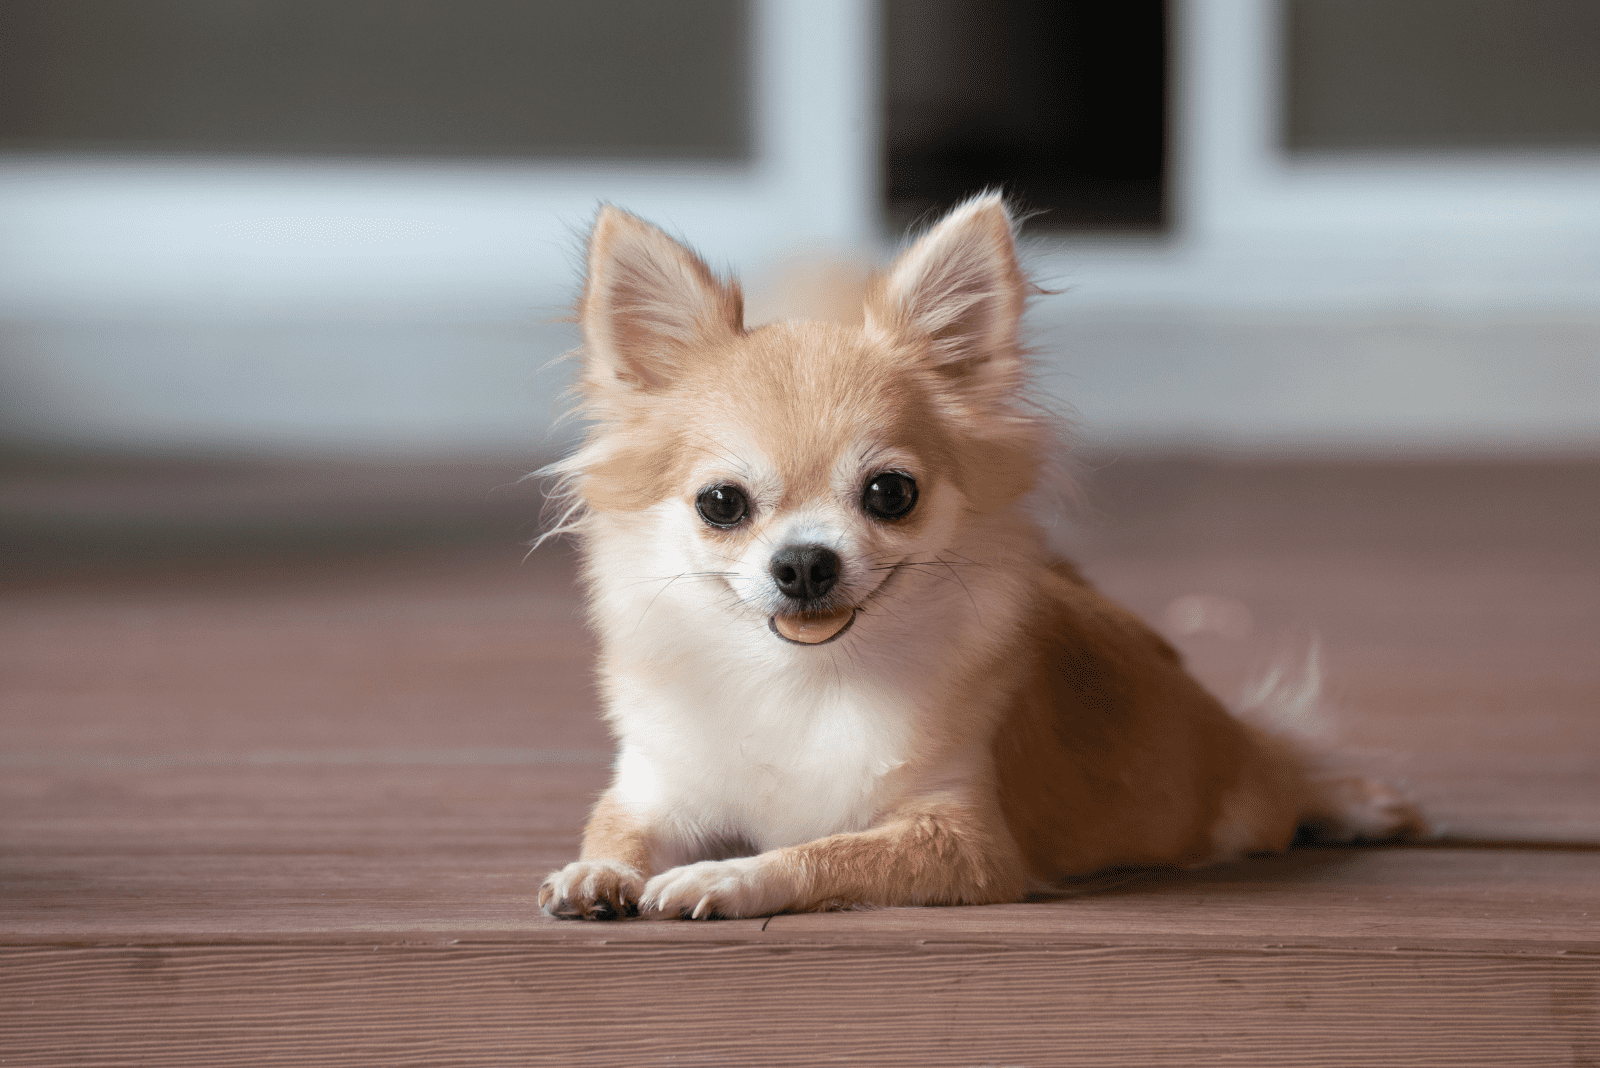 What Were Chihuahuas Bred For? Origins of These Little Dogs